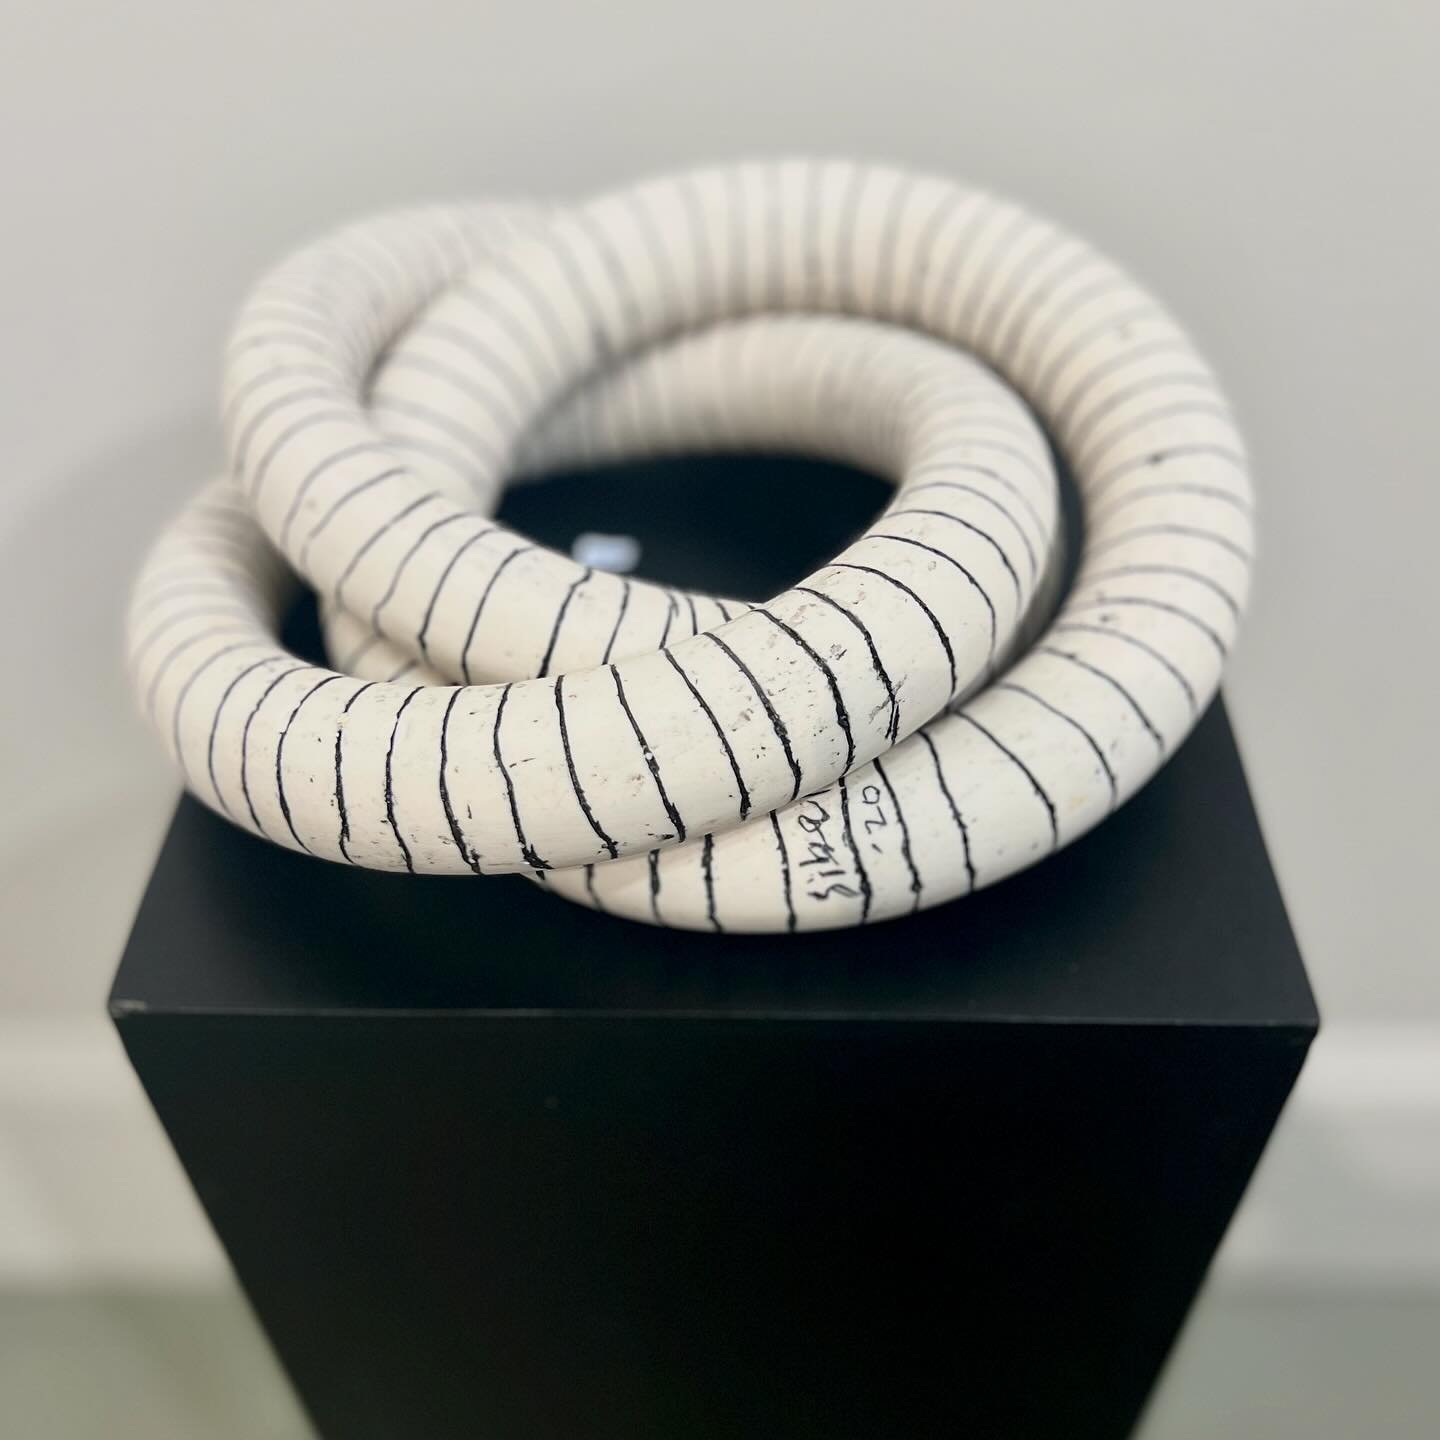 Looking for a unique conversation piece? Something handcrafted and one of a kind? Look no further. This special ceramic piece by popular Turkish artist, Sibel Alpaslan is now on view @kobogallery 

Sibel has been studying and making ceramics for over